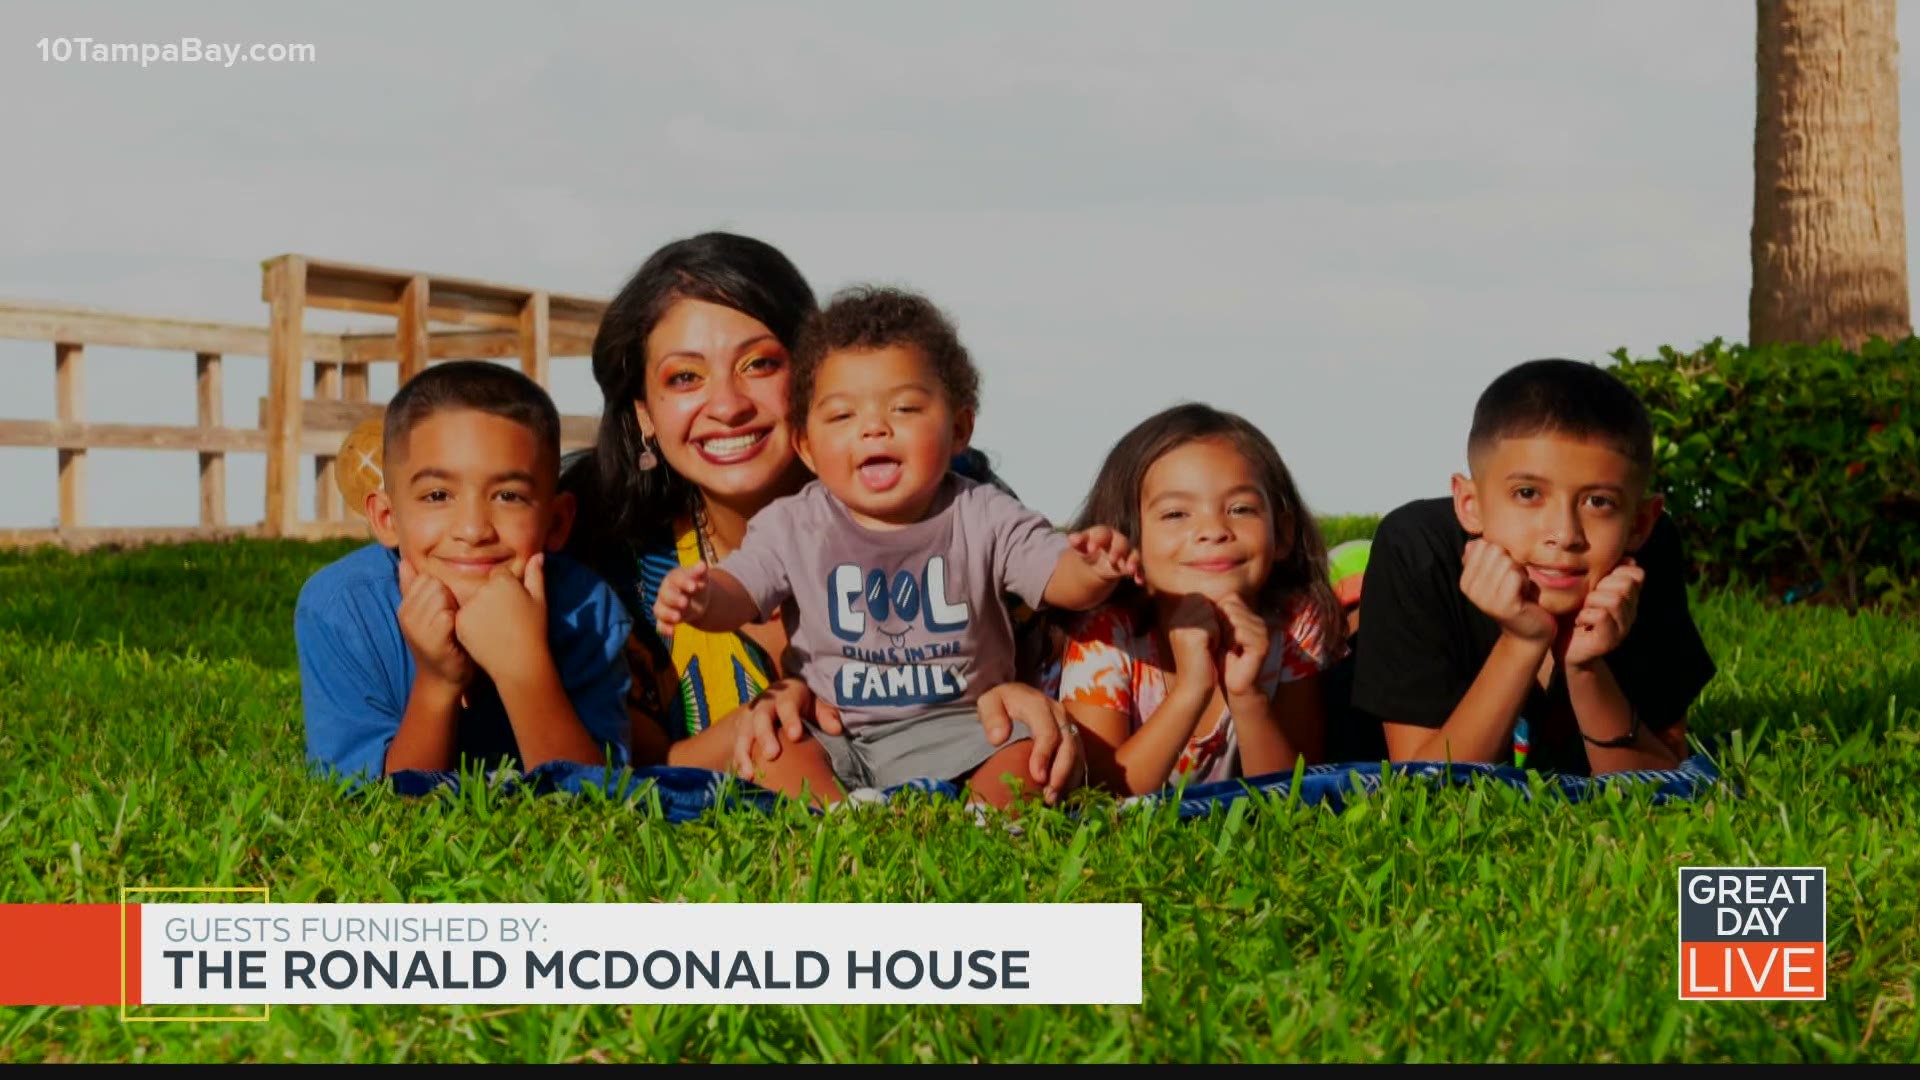 Myrra Velasquez and her kids have been staying at a Ronald McDonald House for about a year, while her youngest undergoes